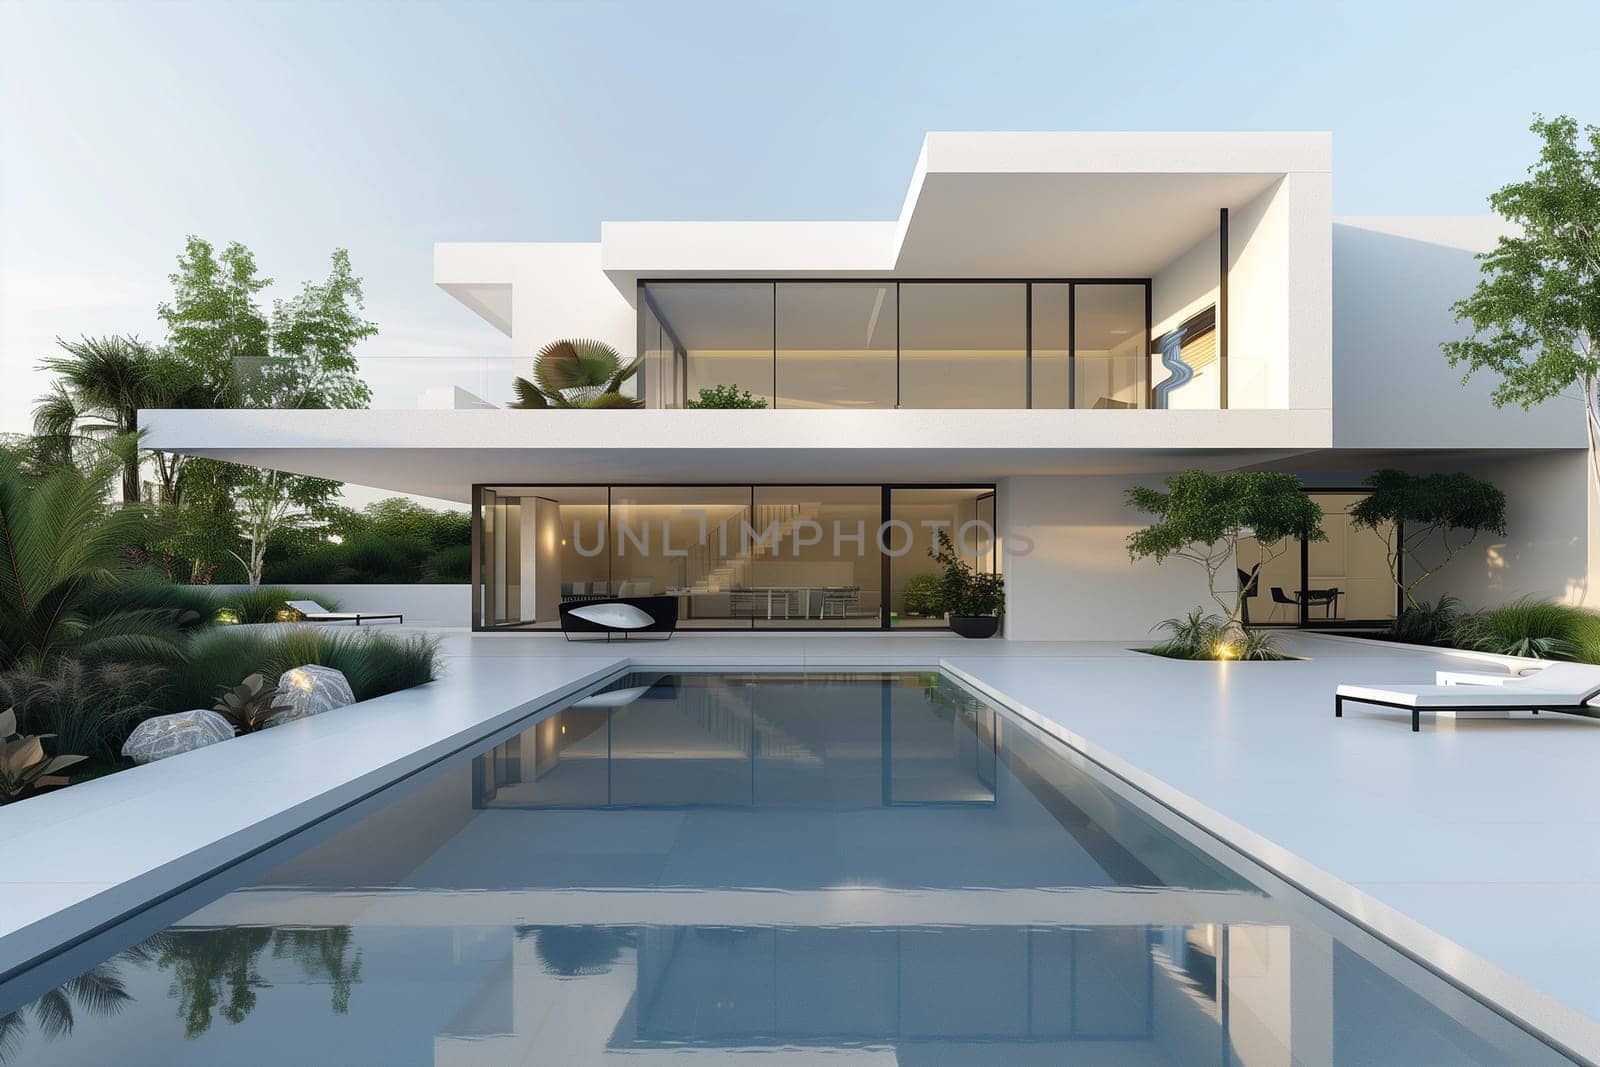 A modern house with a pool in front of it on a sunny day.